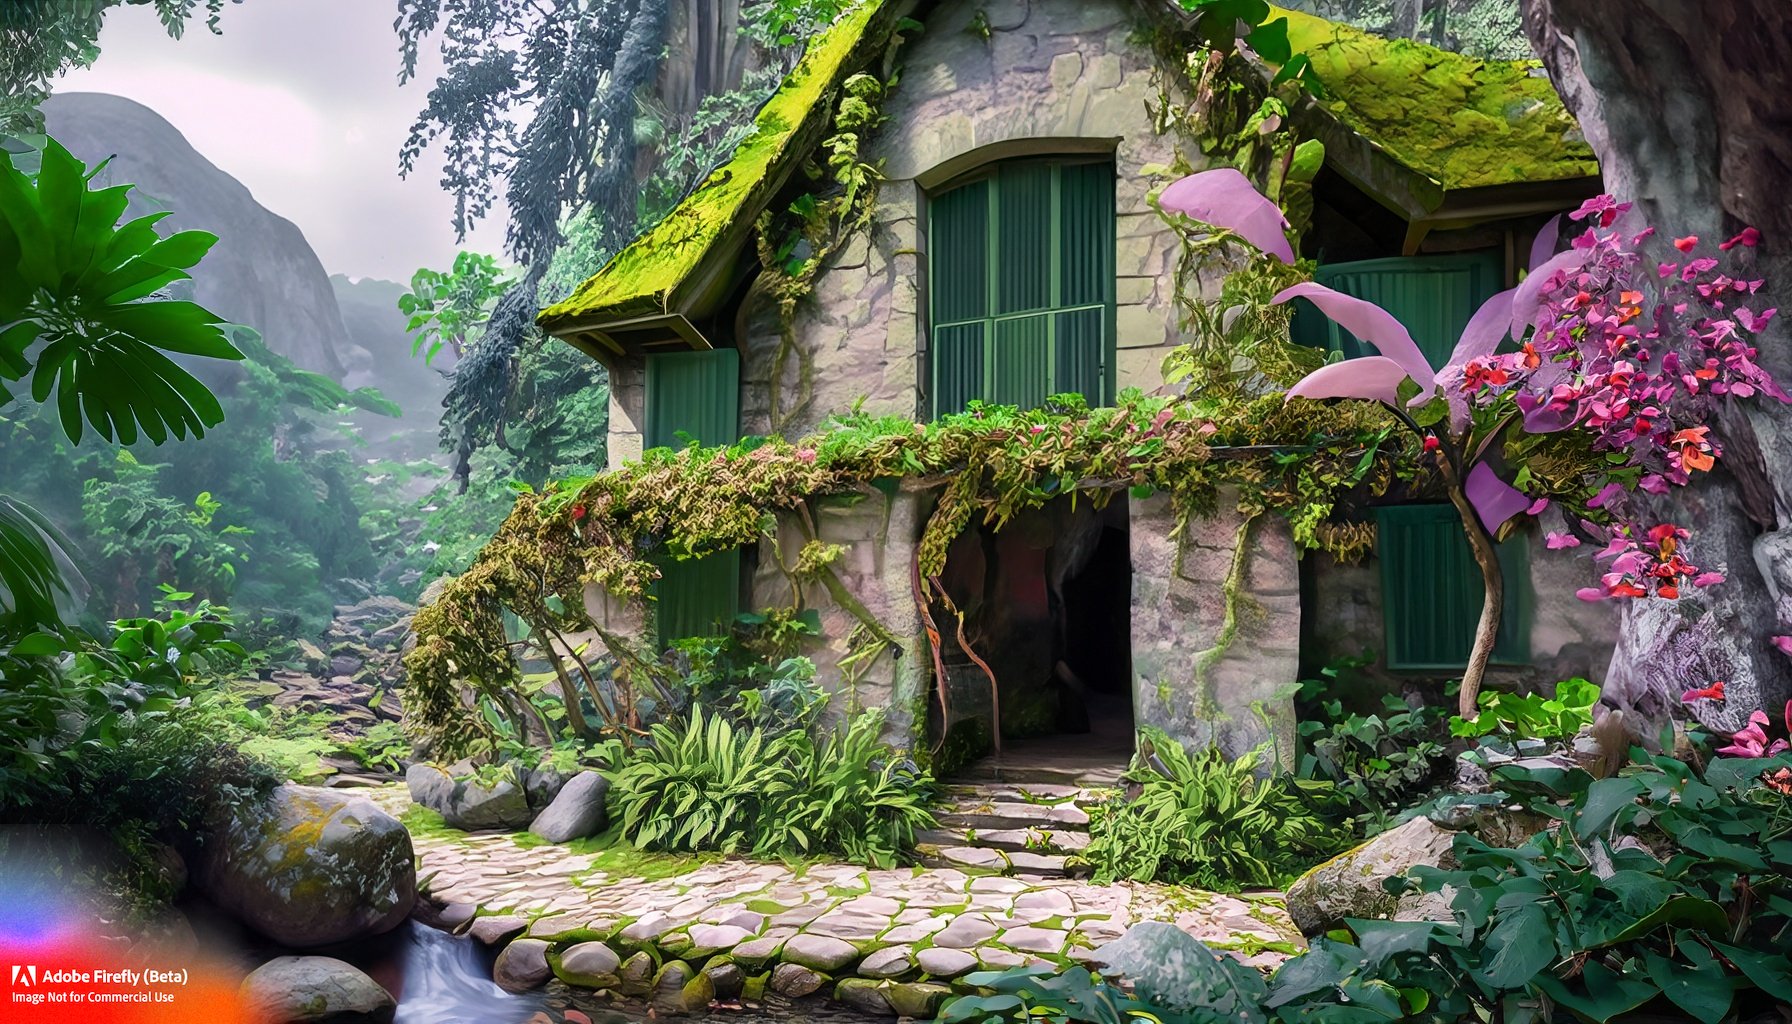 Firefly_A+tropical jungle, Large house made of stones. The windows have gray storm shutters coated with green lichen. Climbing vines, flowers of pink, purple, orange. There's a gray stone pathway leading.jpg